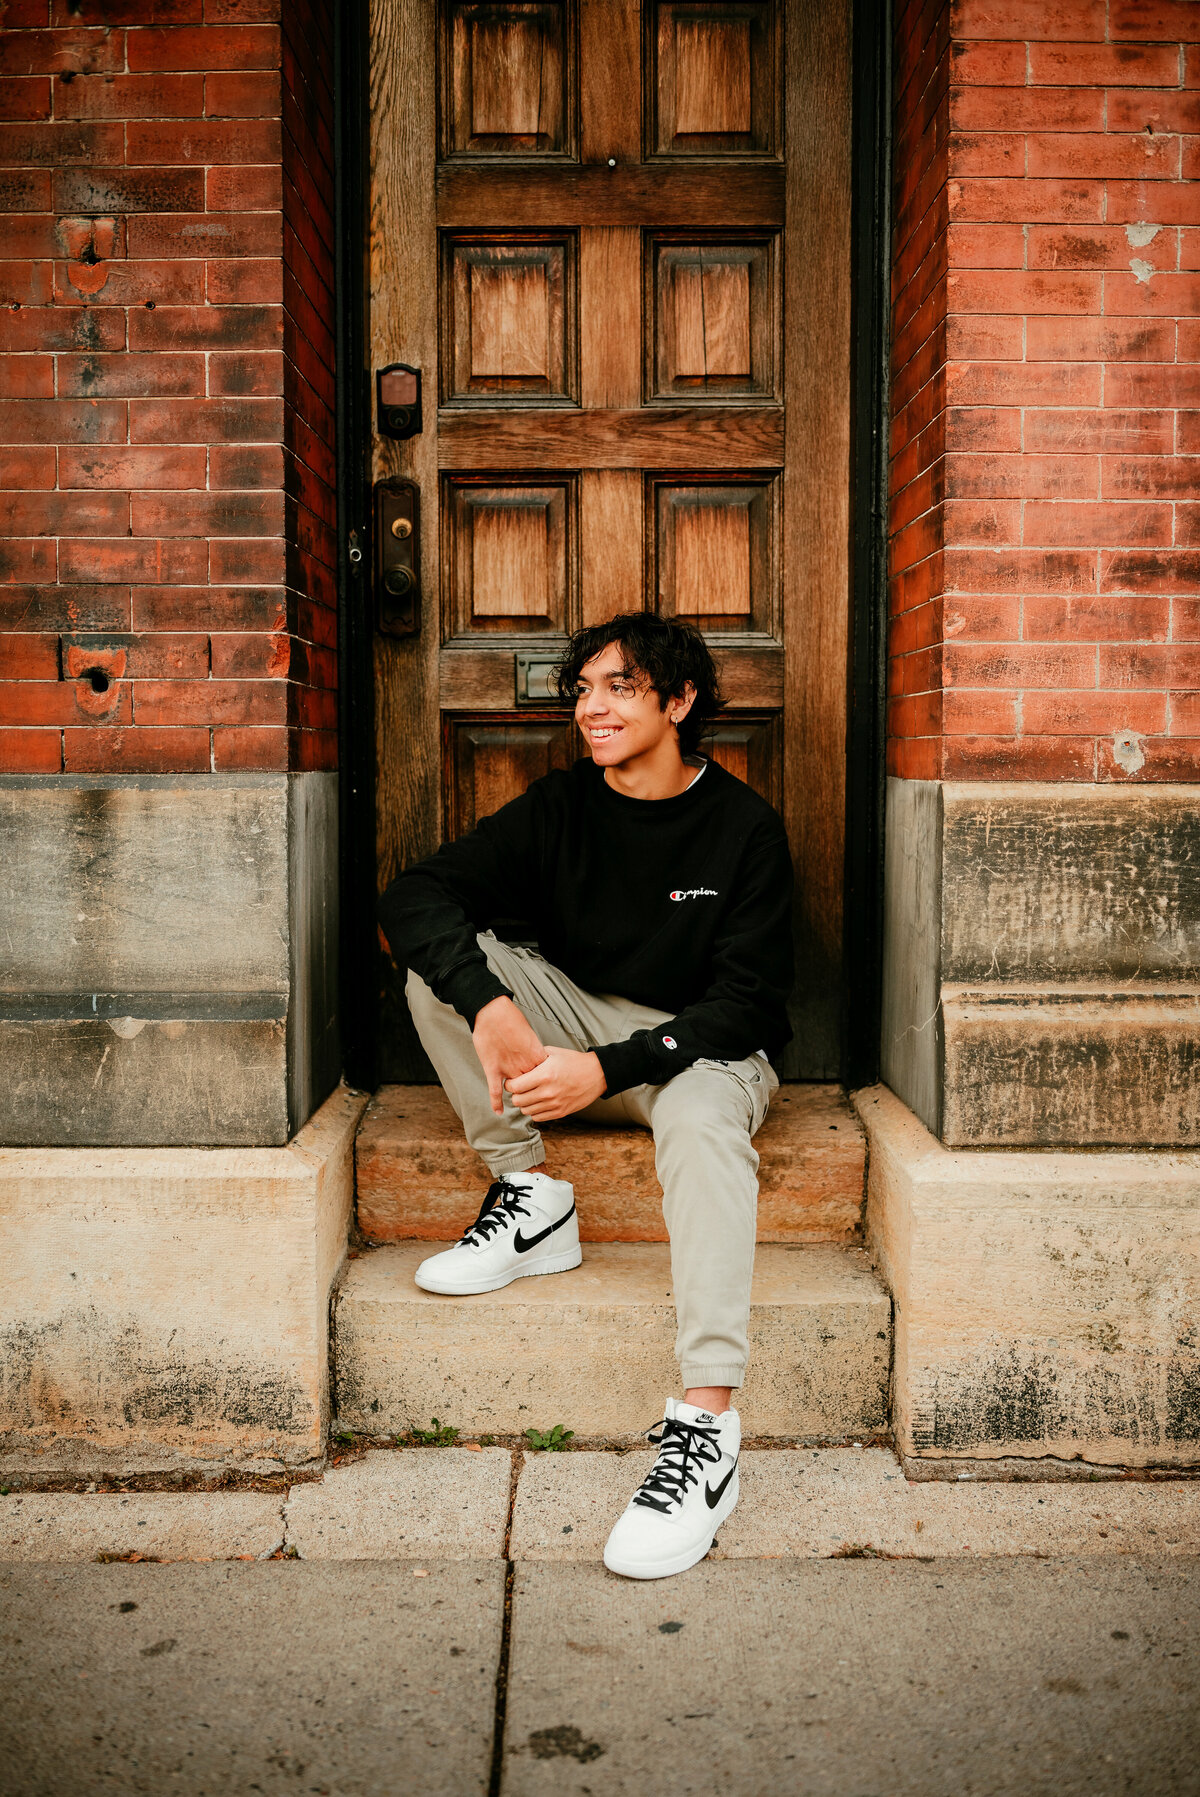 Explore the natural elegance of senior portraits in the urban setting of Minneapolis. Let Shannon Kathleen Photography transform your memories into timeless art. Reserve your session today.